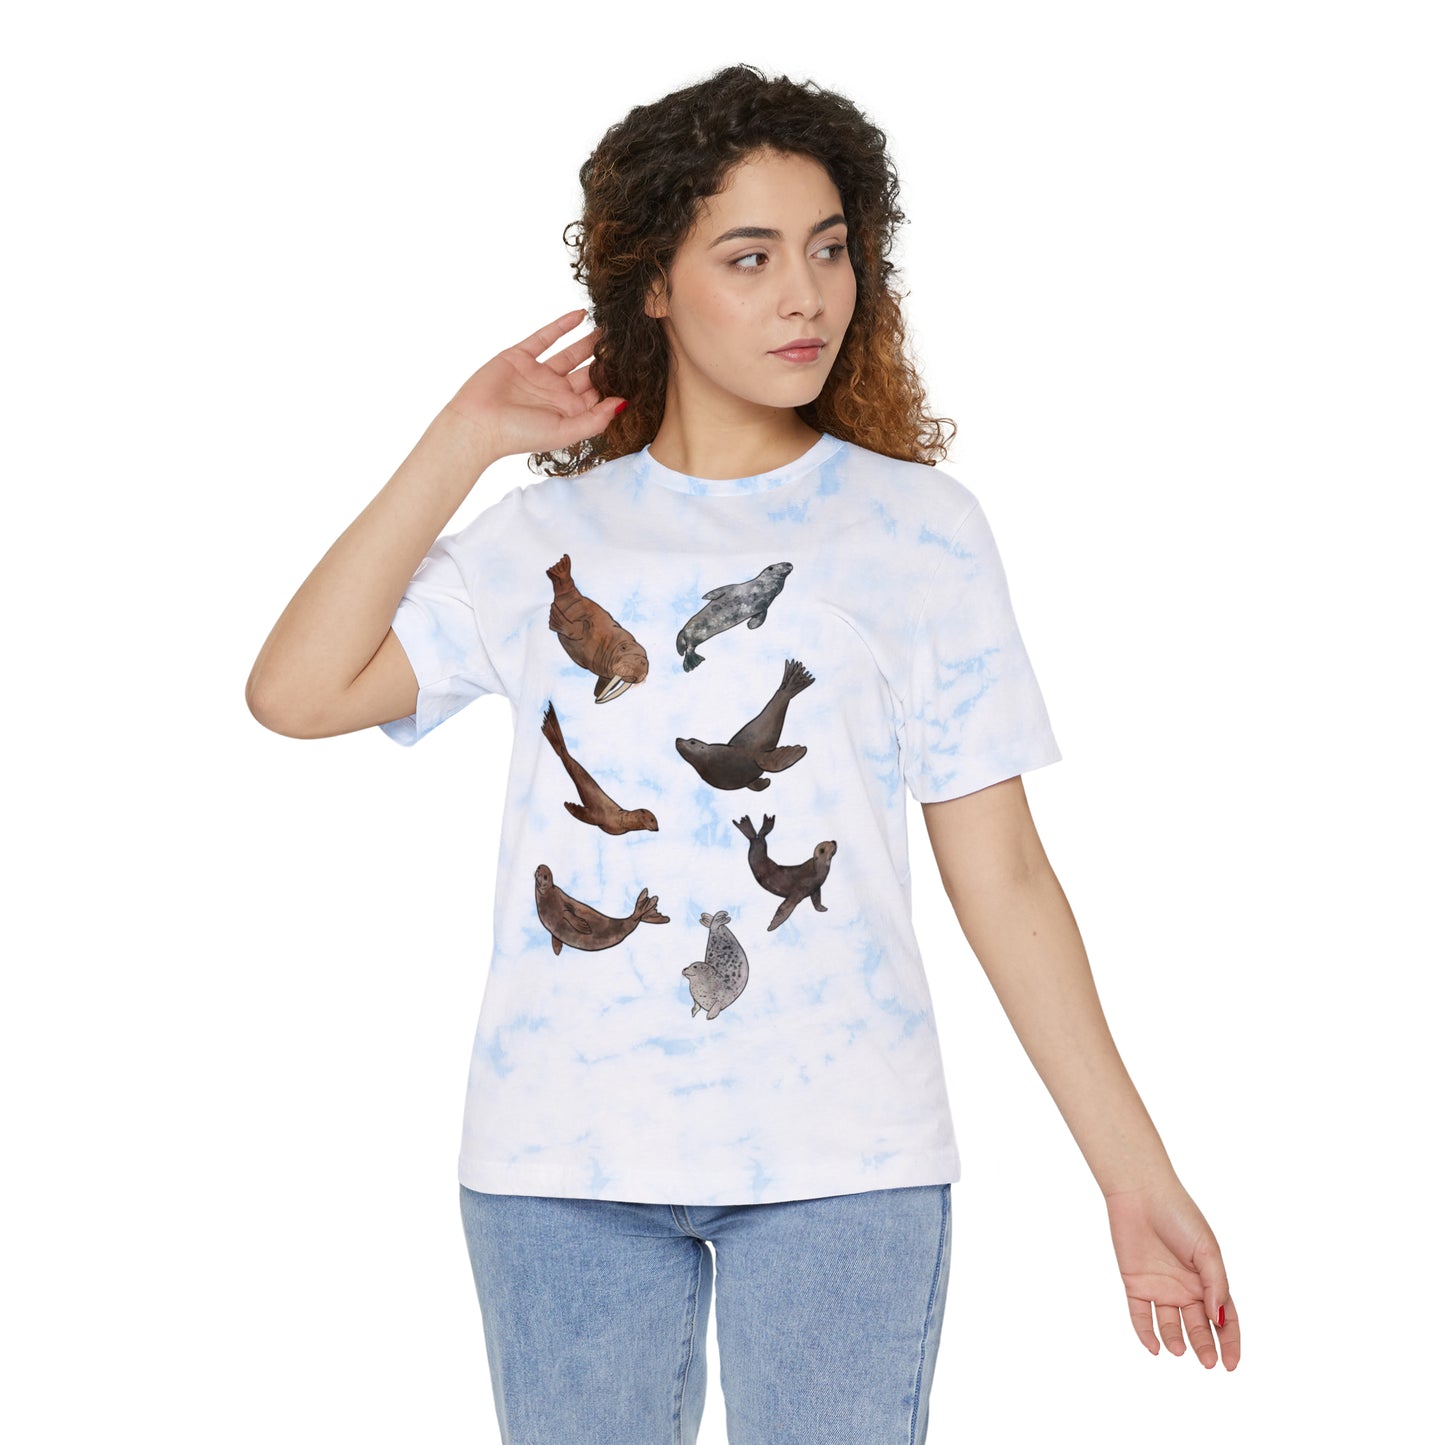 Pinniped Tie-Dyed T-Shirt